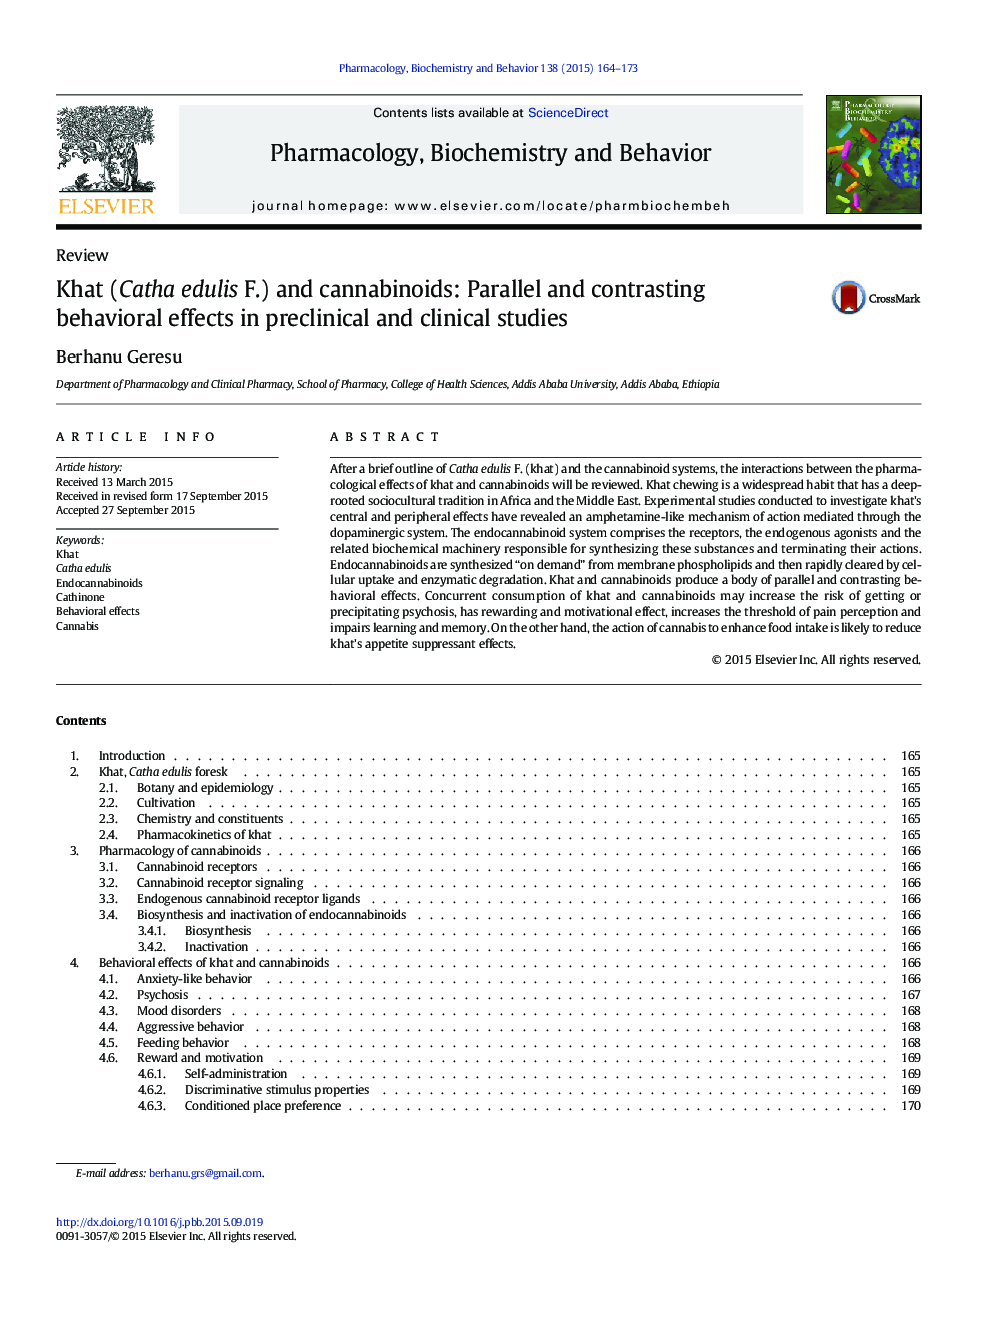 Khat (Catha edulis F.) and cannabinoids: Parallel and contrasting behavioral effects in preclinical and clinical studies